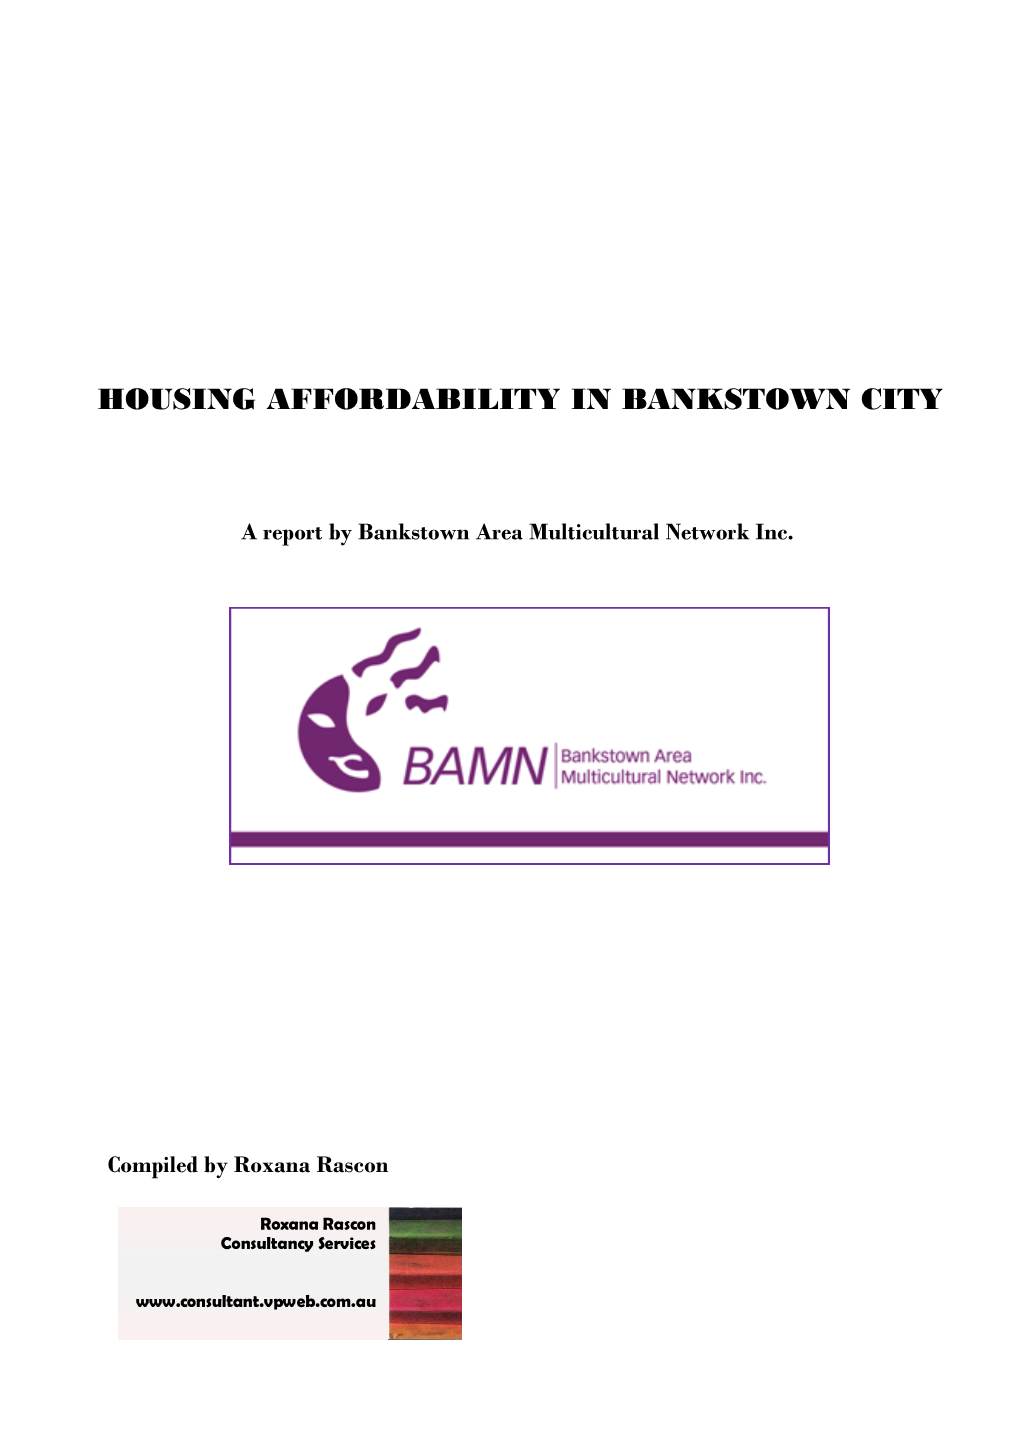 Affordable Housing in Bankstown